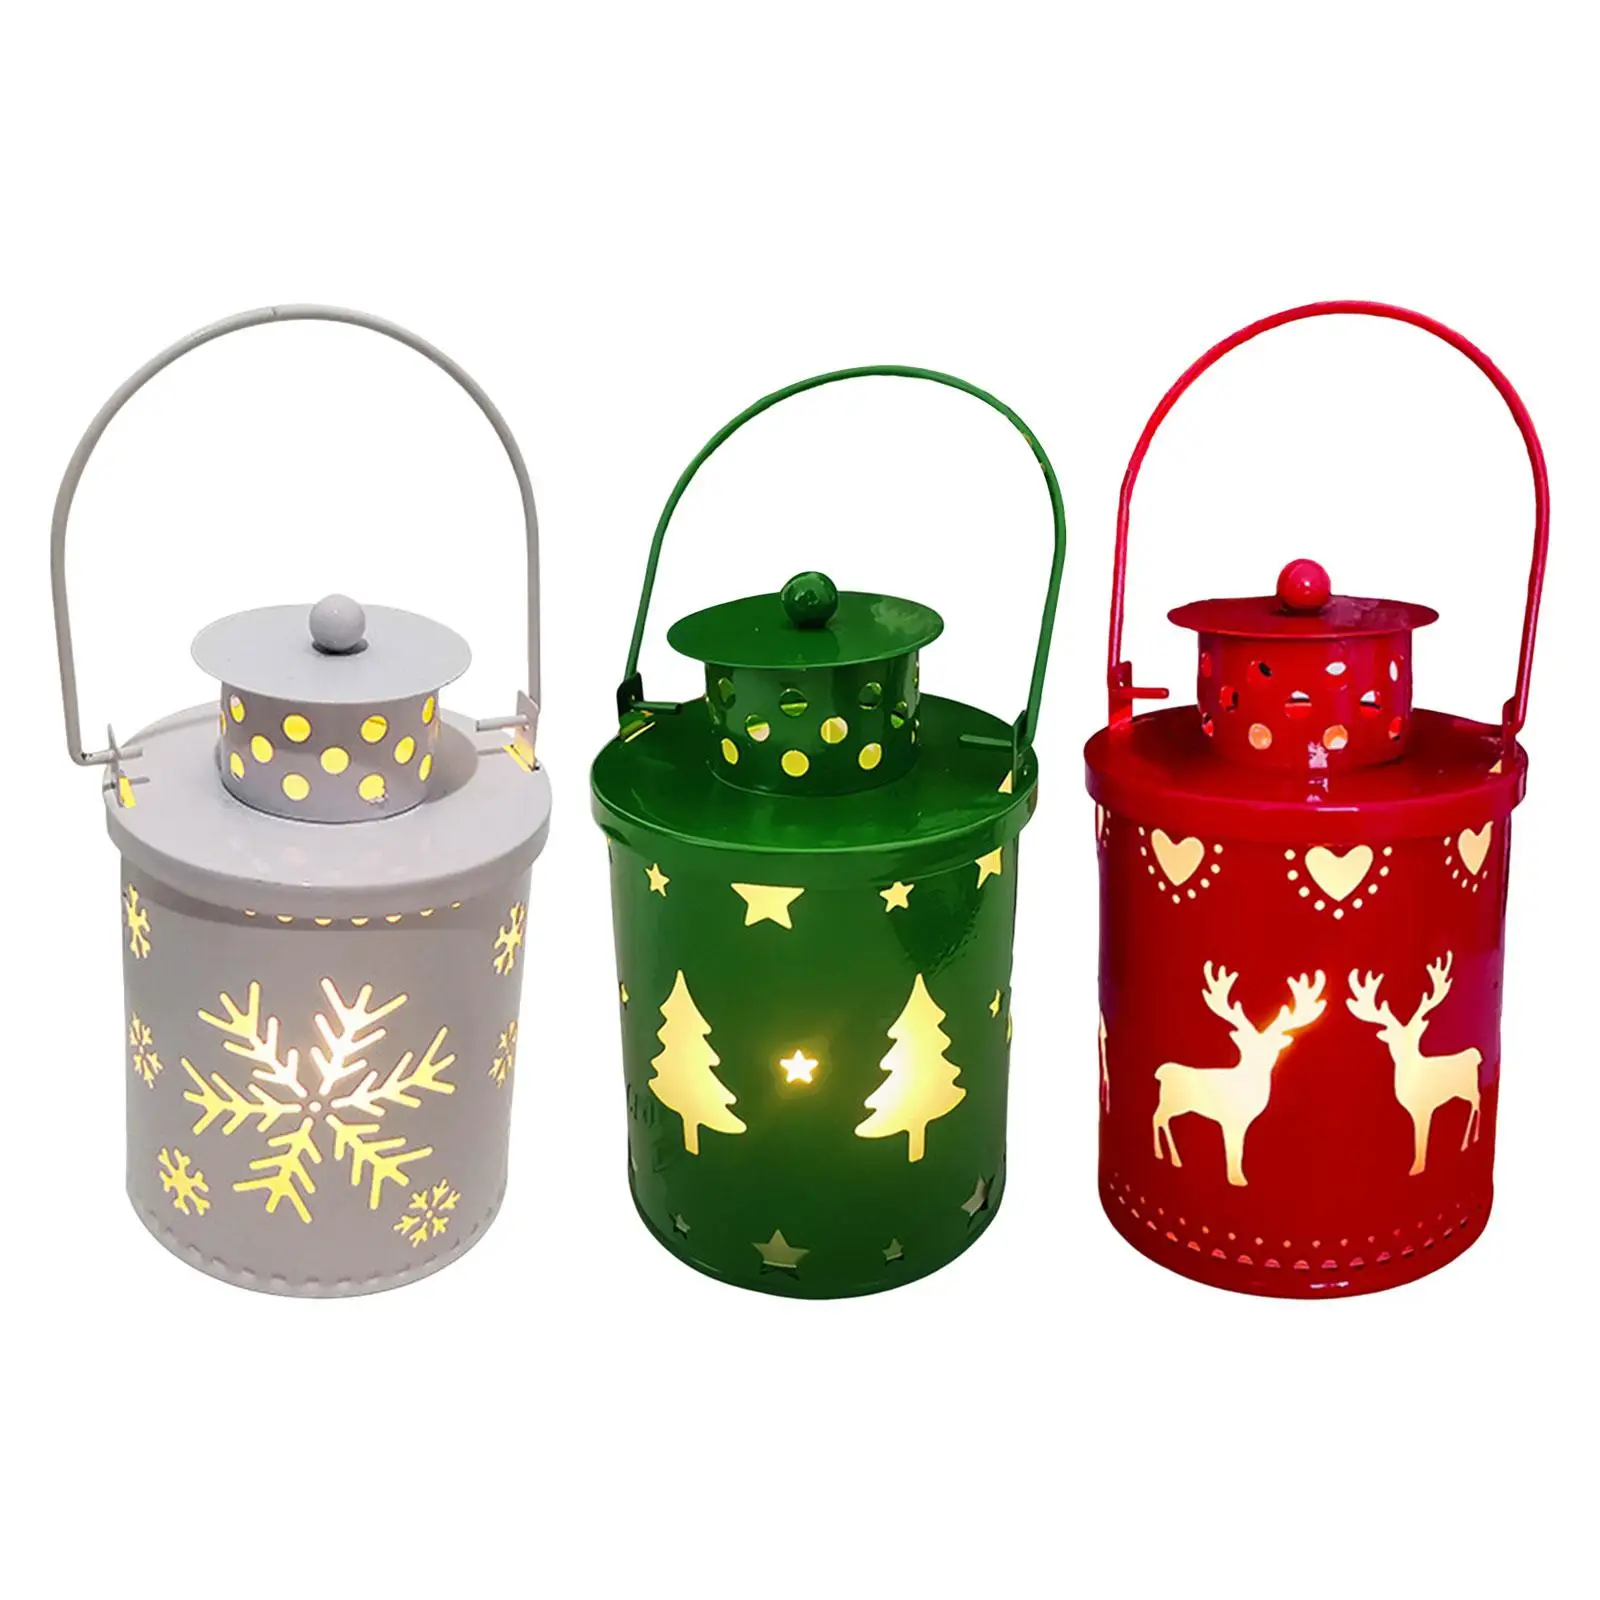 Candle Lantern Nightlight Lighting Christmas Lighted Lantern Flameless Candle Light for Holidays Xmas Festival Party Tabletop